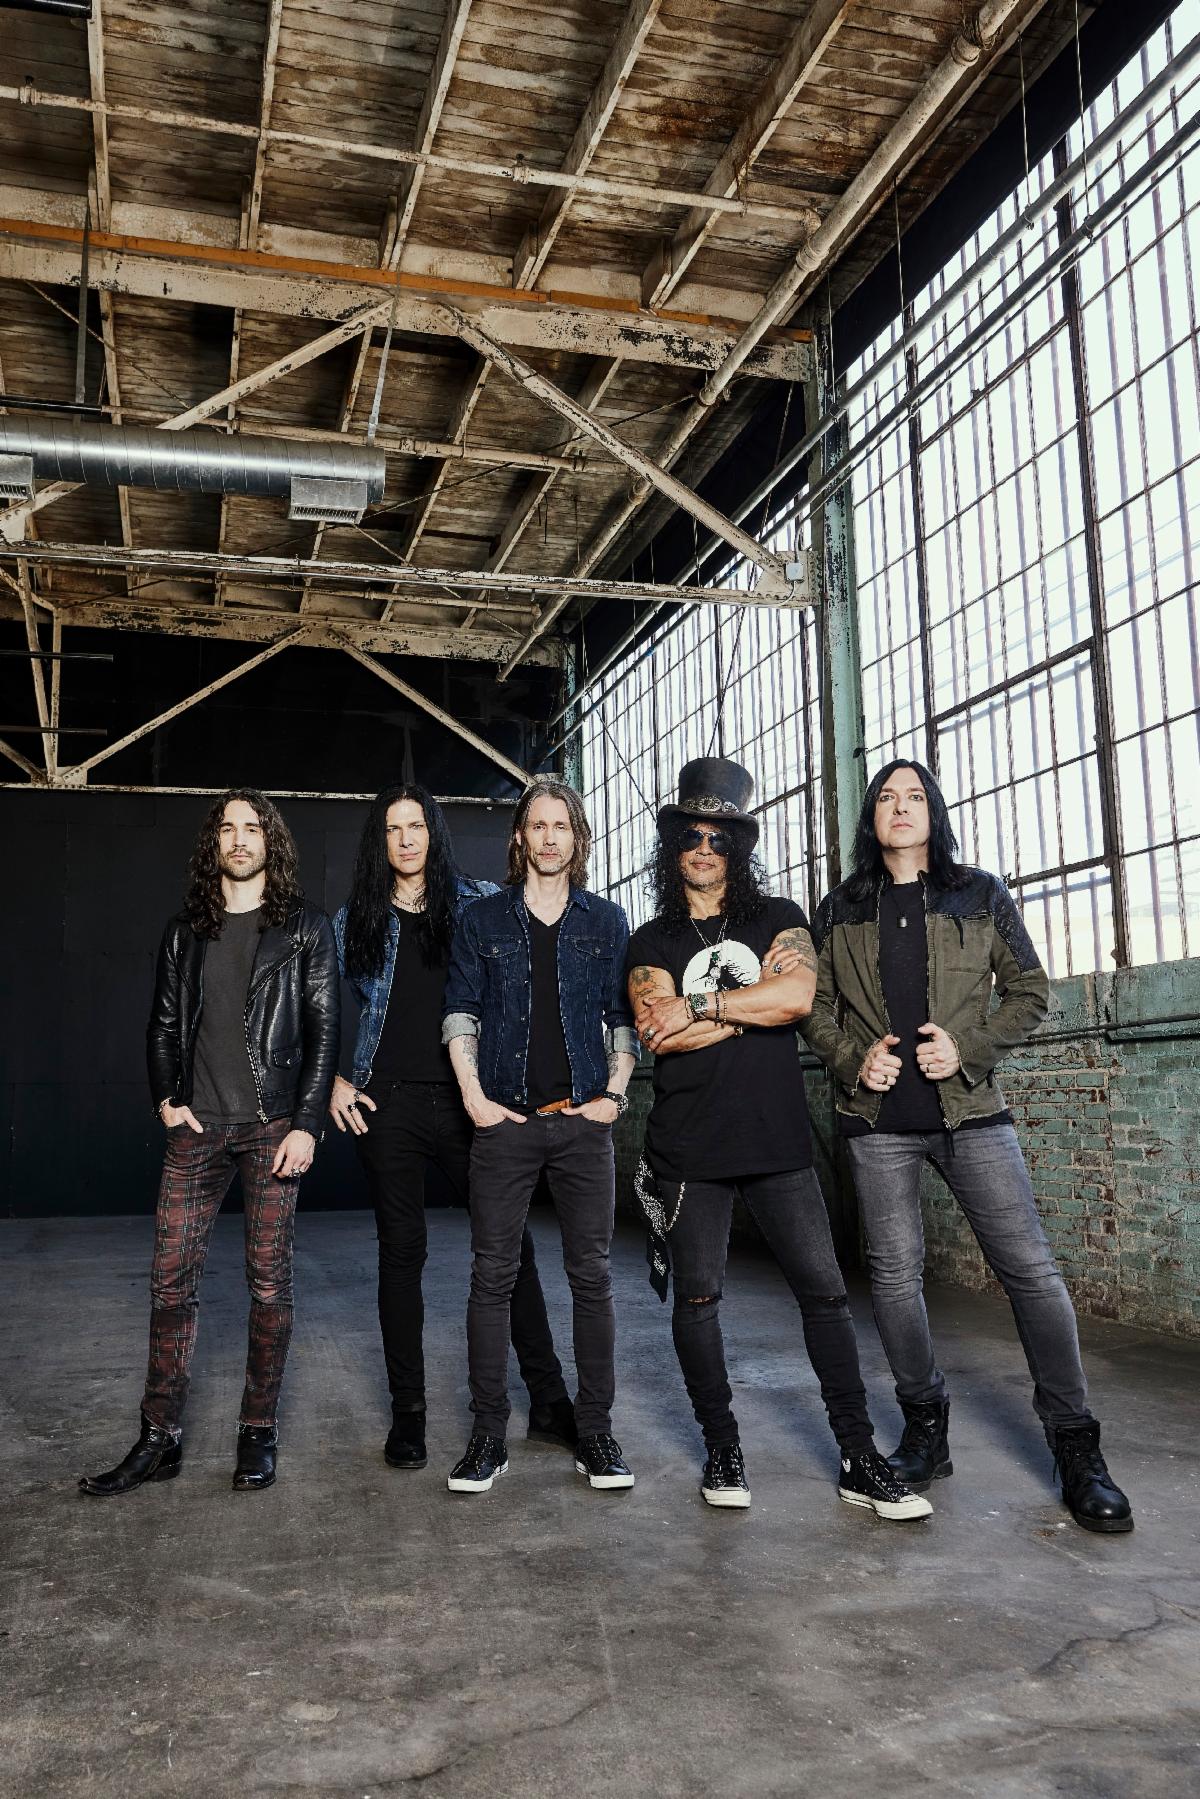 Gibson Records: Gibson Announces Launch of Record Label, First Album with Slash Featuring Myles Kennedy and the Conspirators, To Be Released in Partnership with BMG